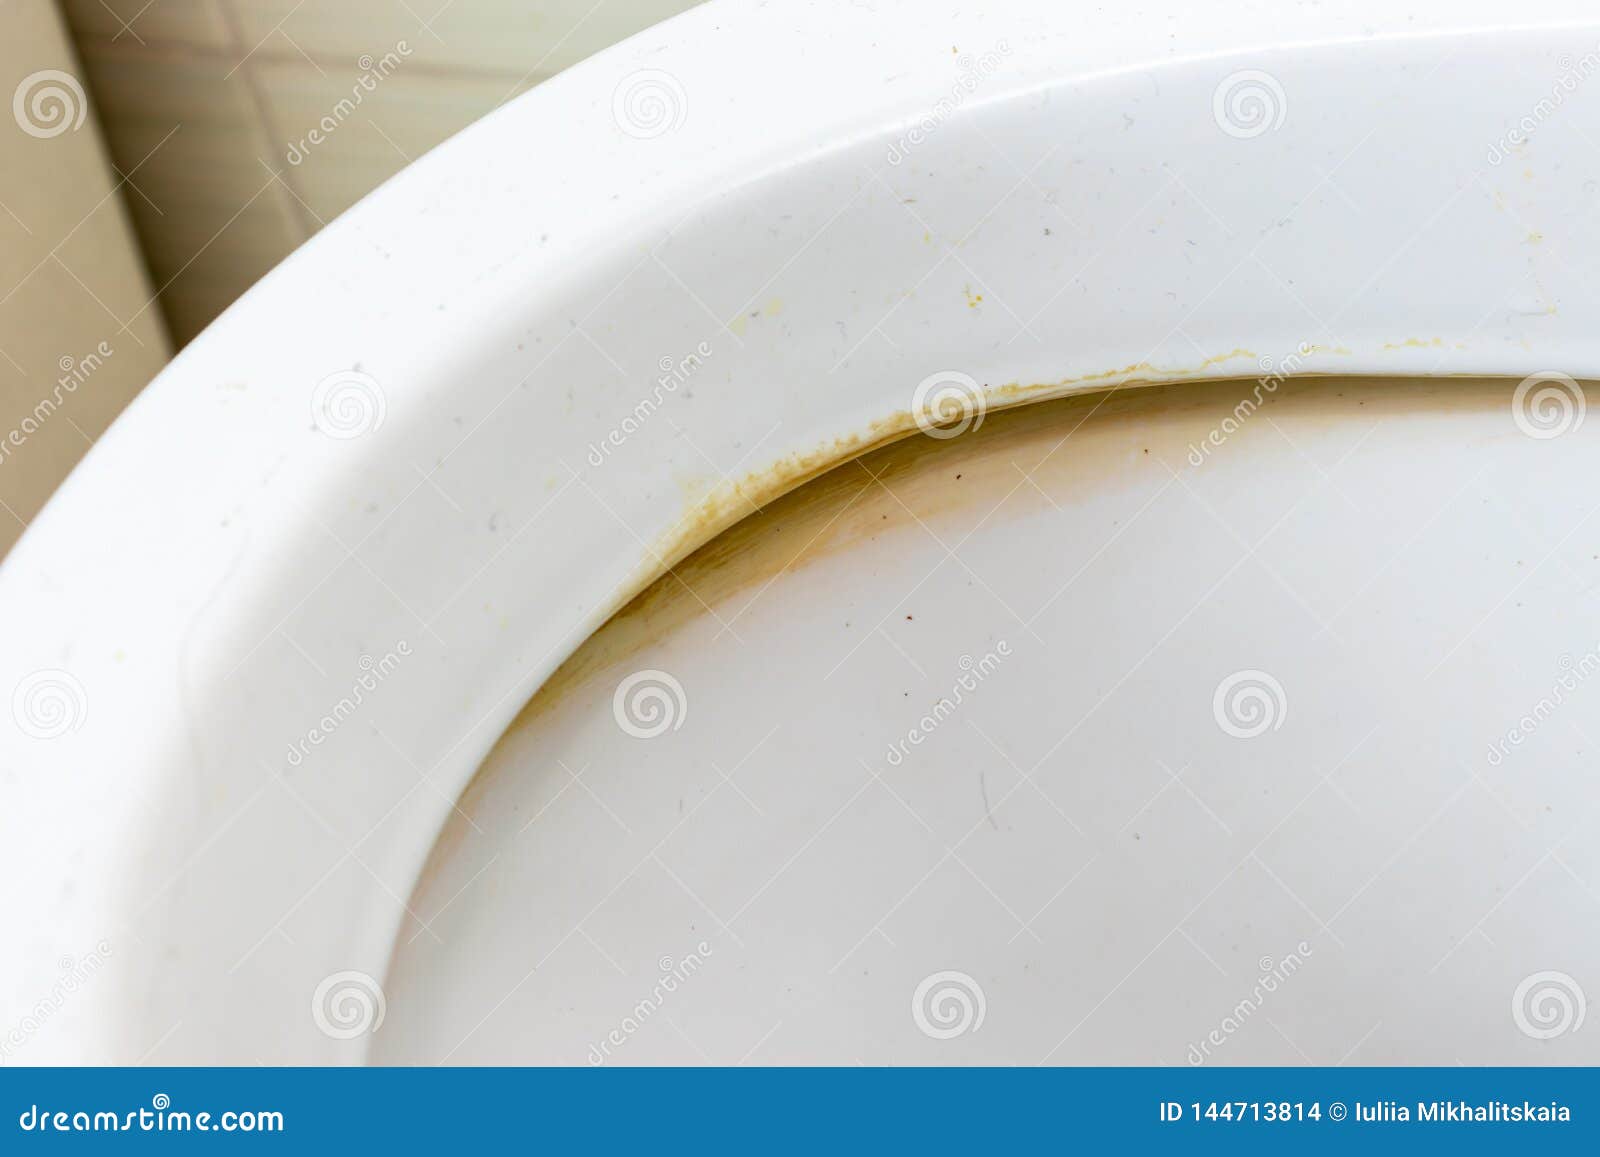 Dirty Unhygienic Toilet Rim with Limescale and Rust Stain at